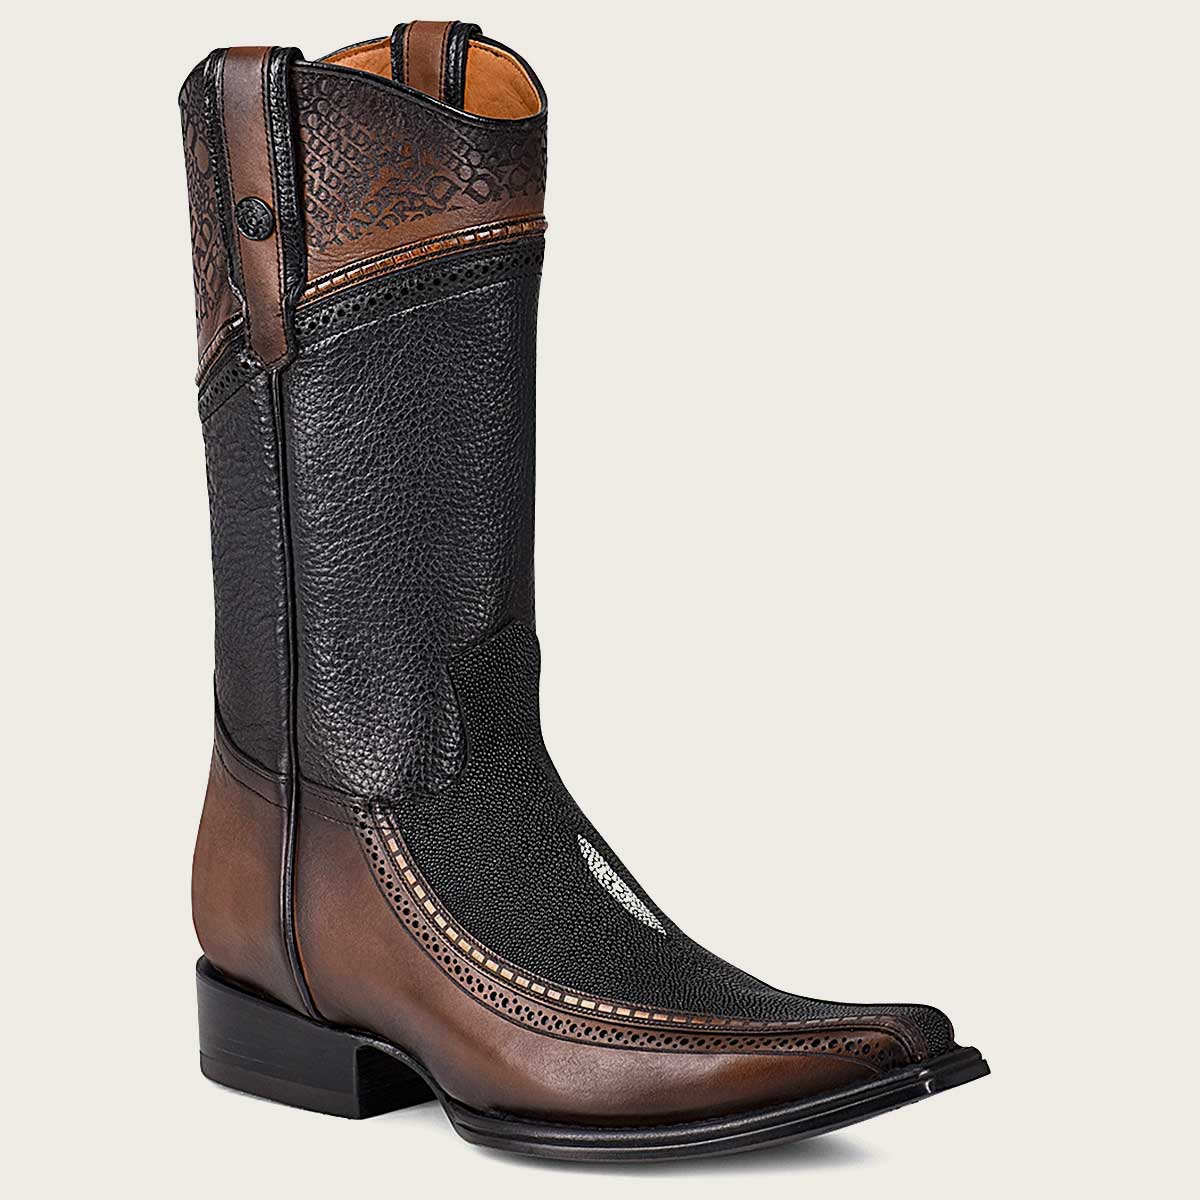 Meticulously crafted with utmost precision, this boot showcases a harmonious fusion of genuine stingray leather and premium bovine leather